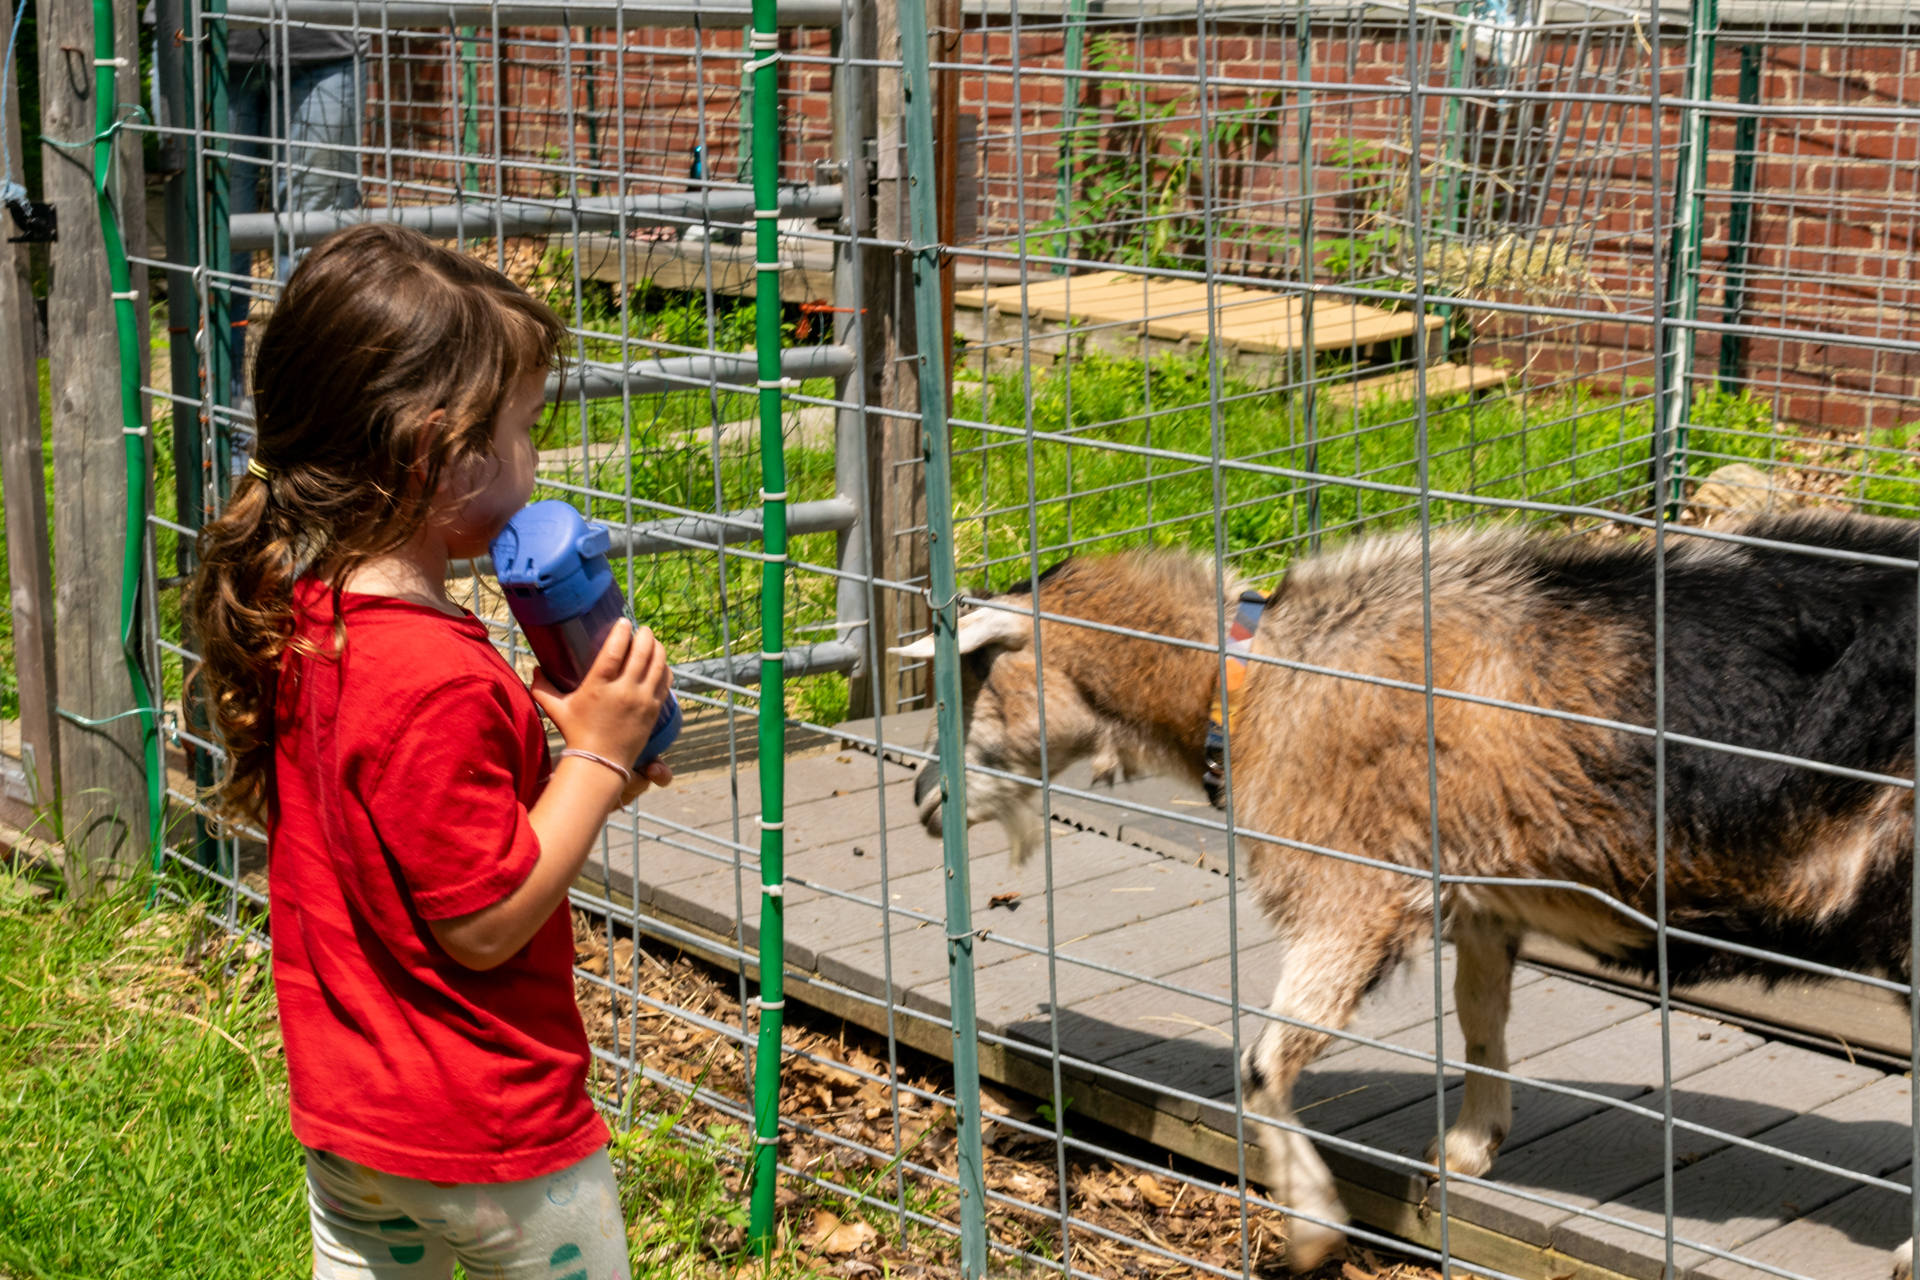 A camper at Habitat Nature Camp standing in front of the goat enclosure, holding a water bottle, while a goat rubs against the fence